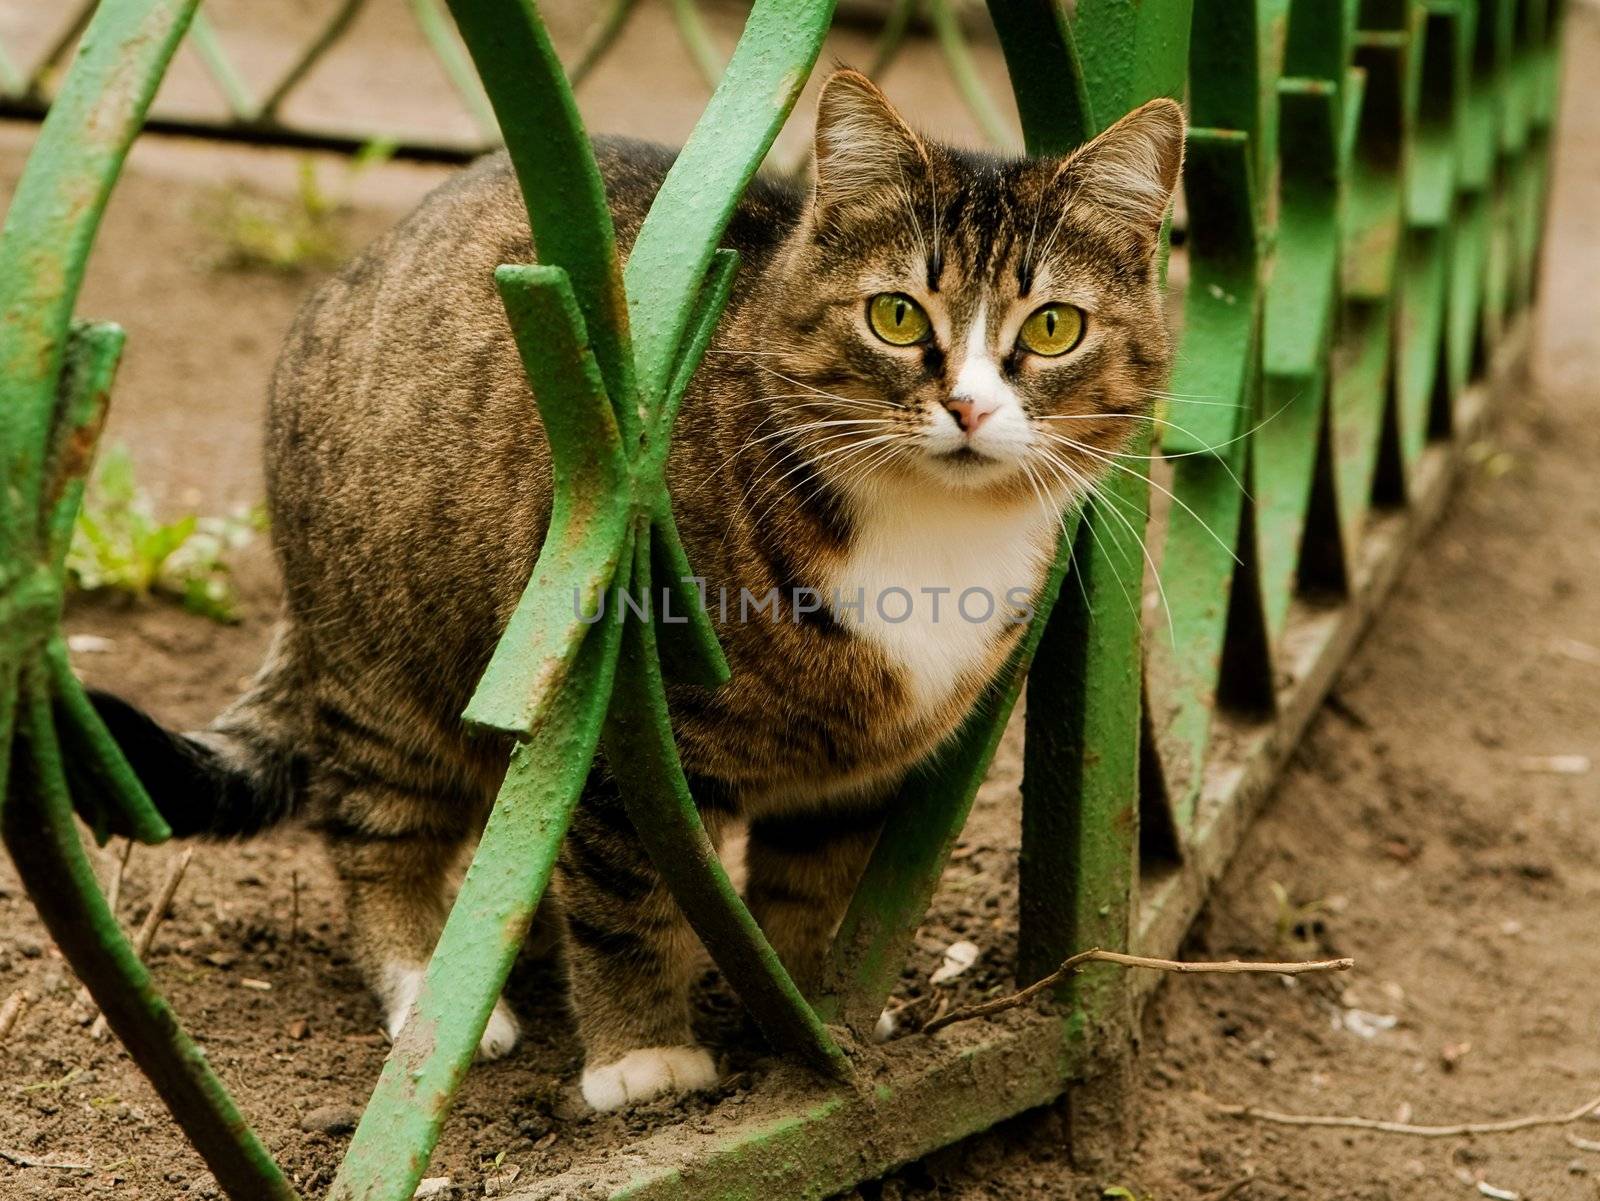 Cat on walk by Gravicapa